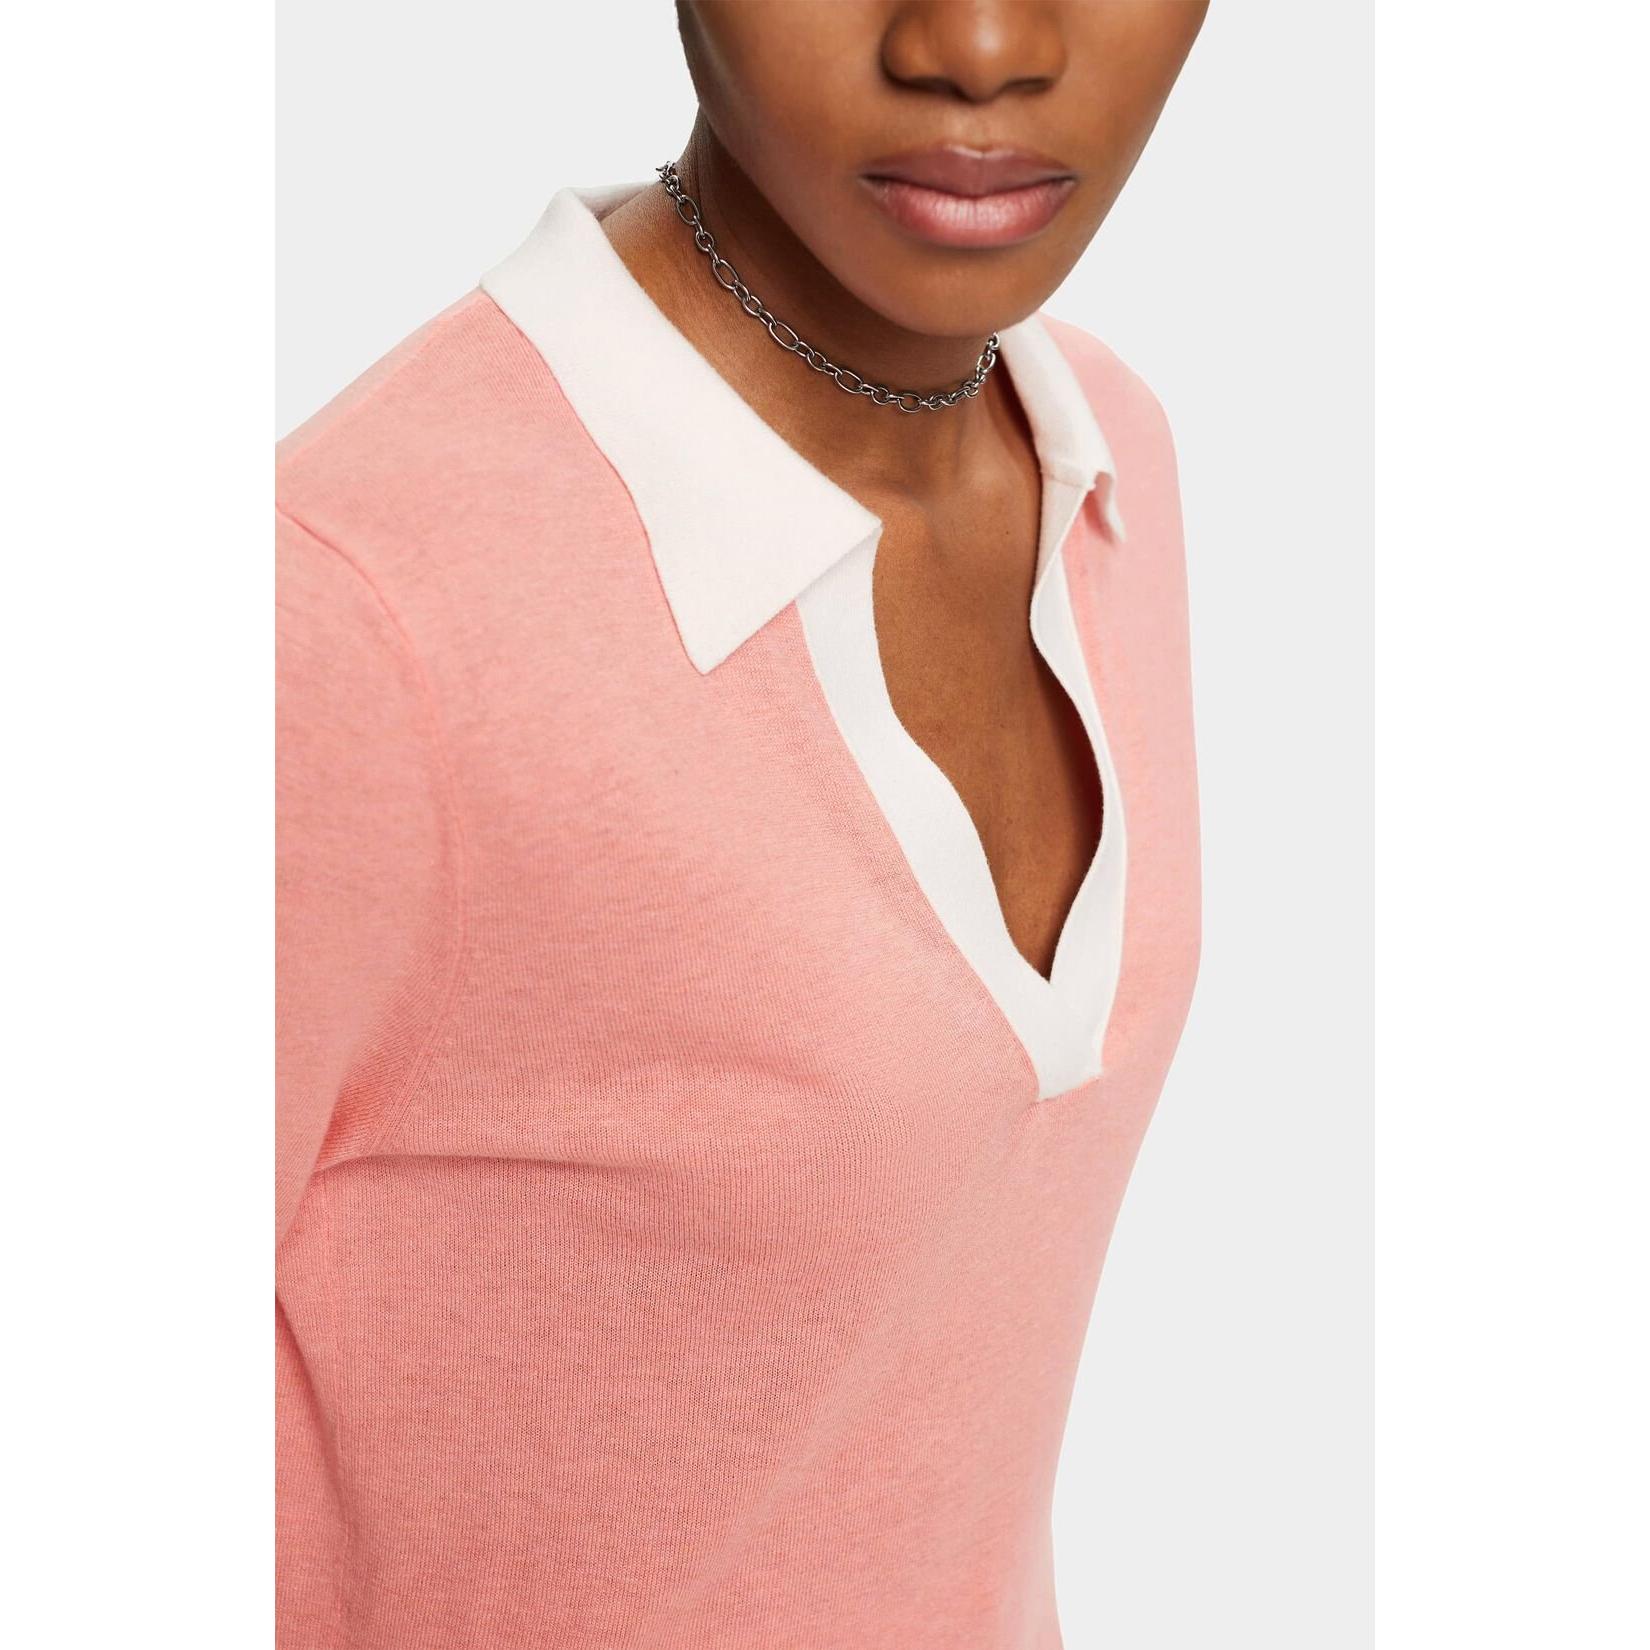 Esprit- Linen/Viscose Blend Contrast Polo in Pink-SQ2257517